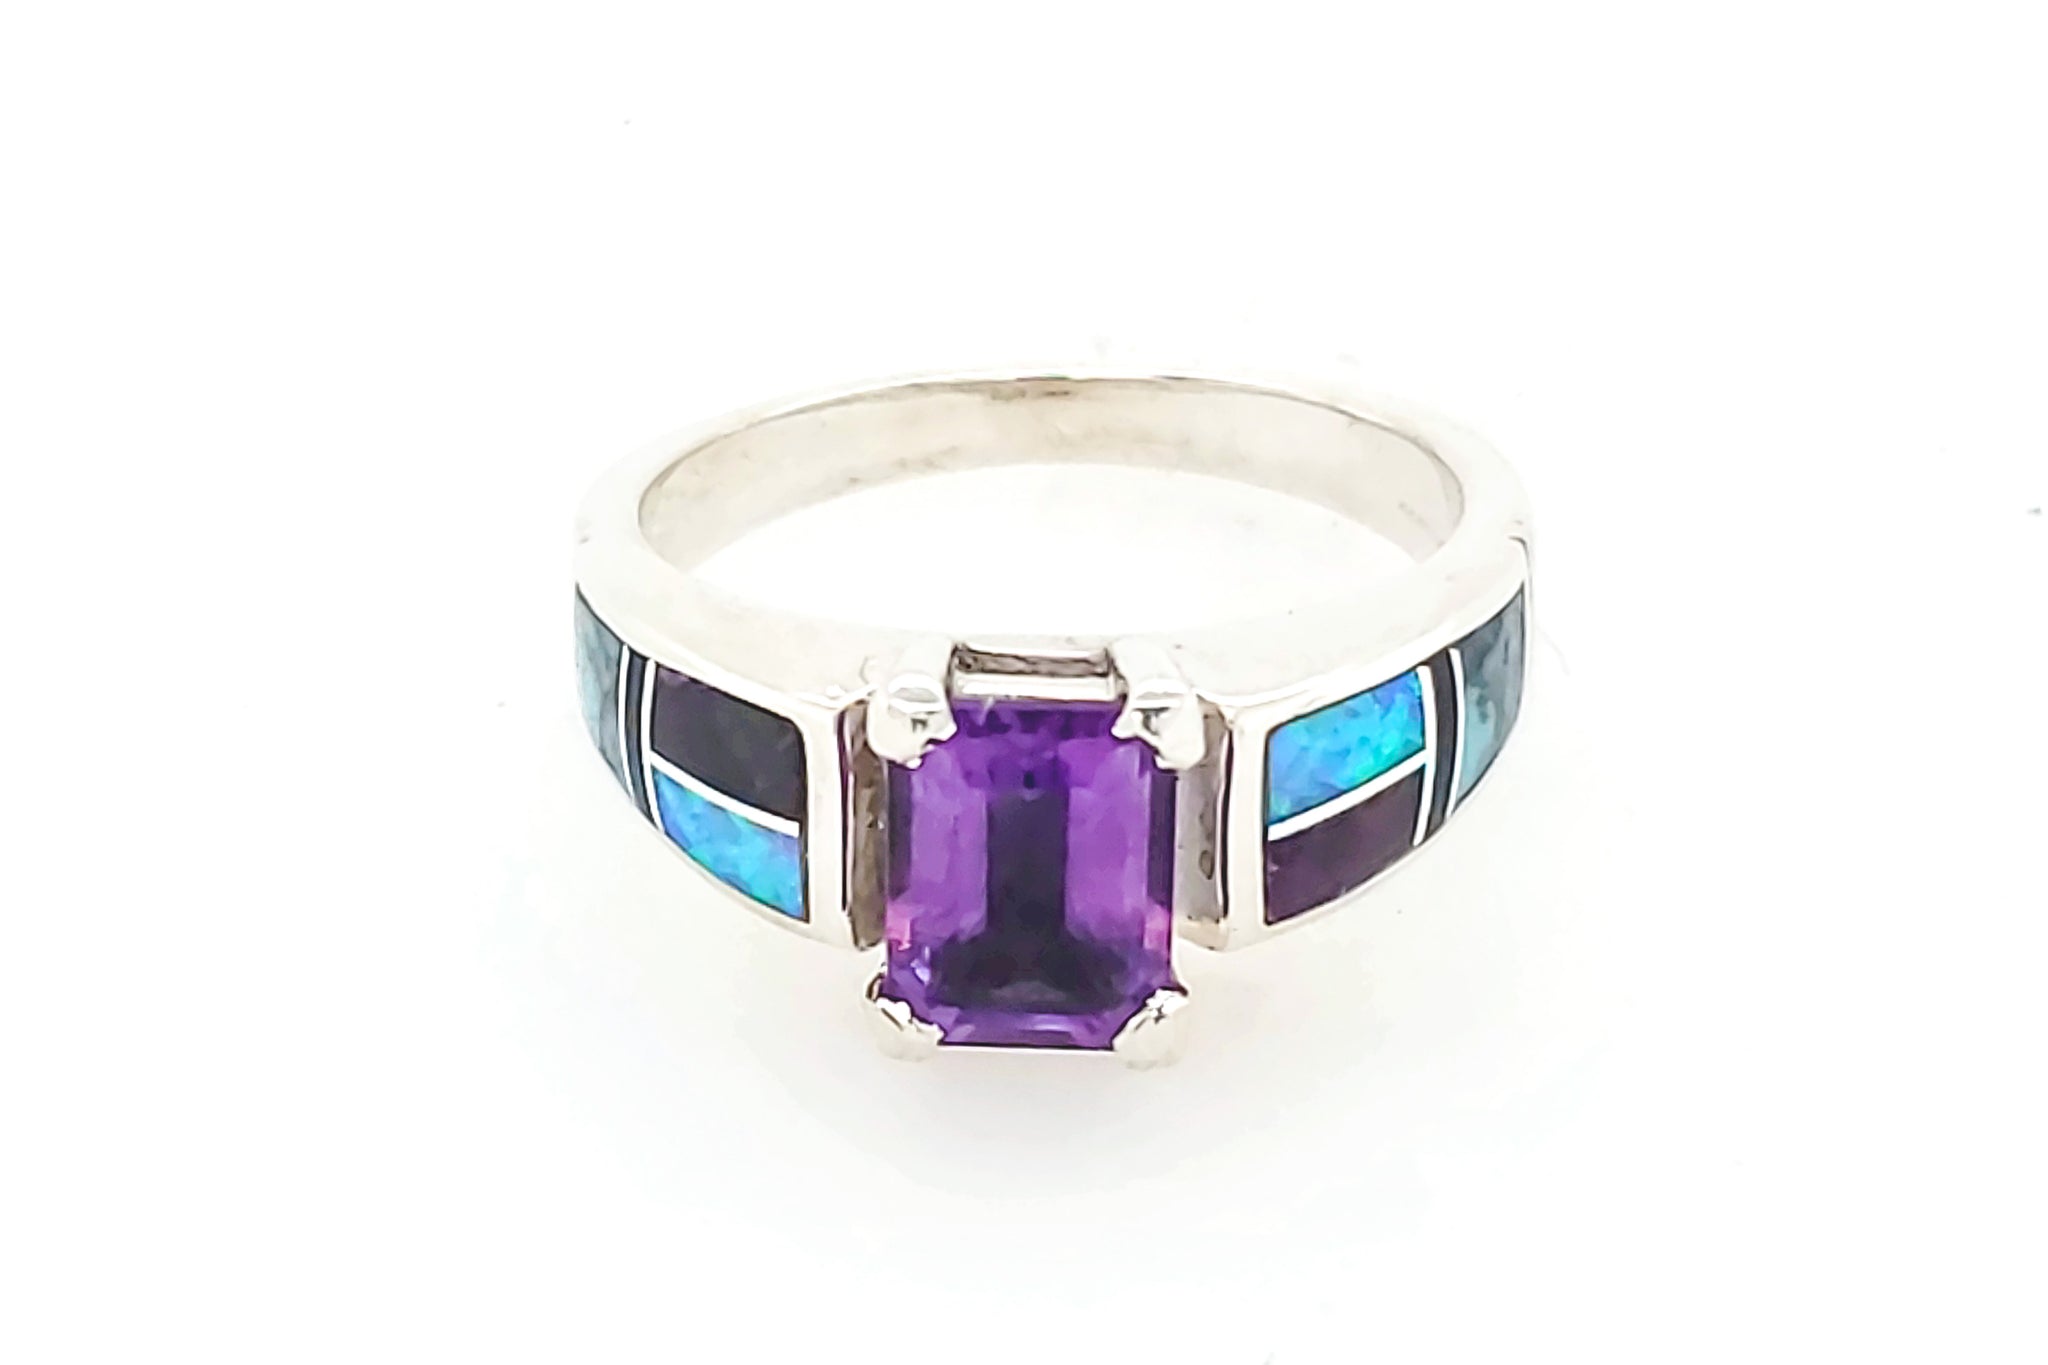 Buy SIDHARTH GEMS 5.25 Ratti 4.00 Carat Amethyst Ring Katela Ring Original  Certified Natural Amethyst Stone Ring Astrological Birthstone Gold Plated  Adjustable Ring Size 16-28 for Men and Women,s at Amazon.in